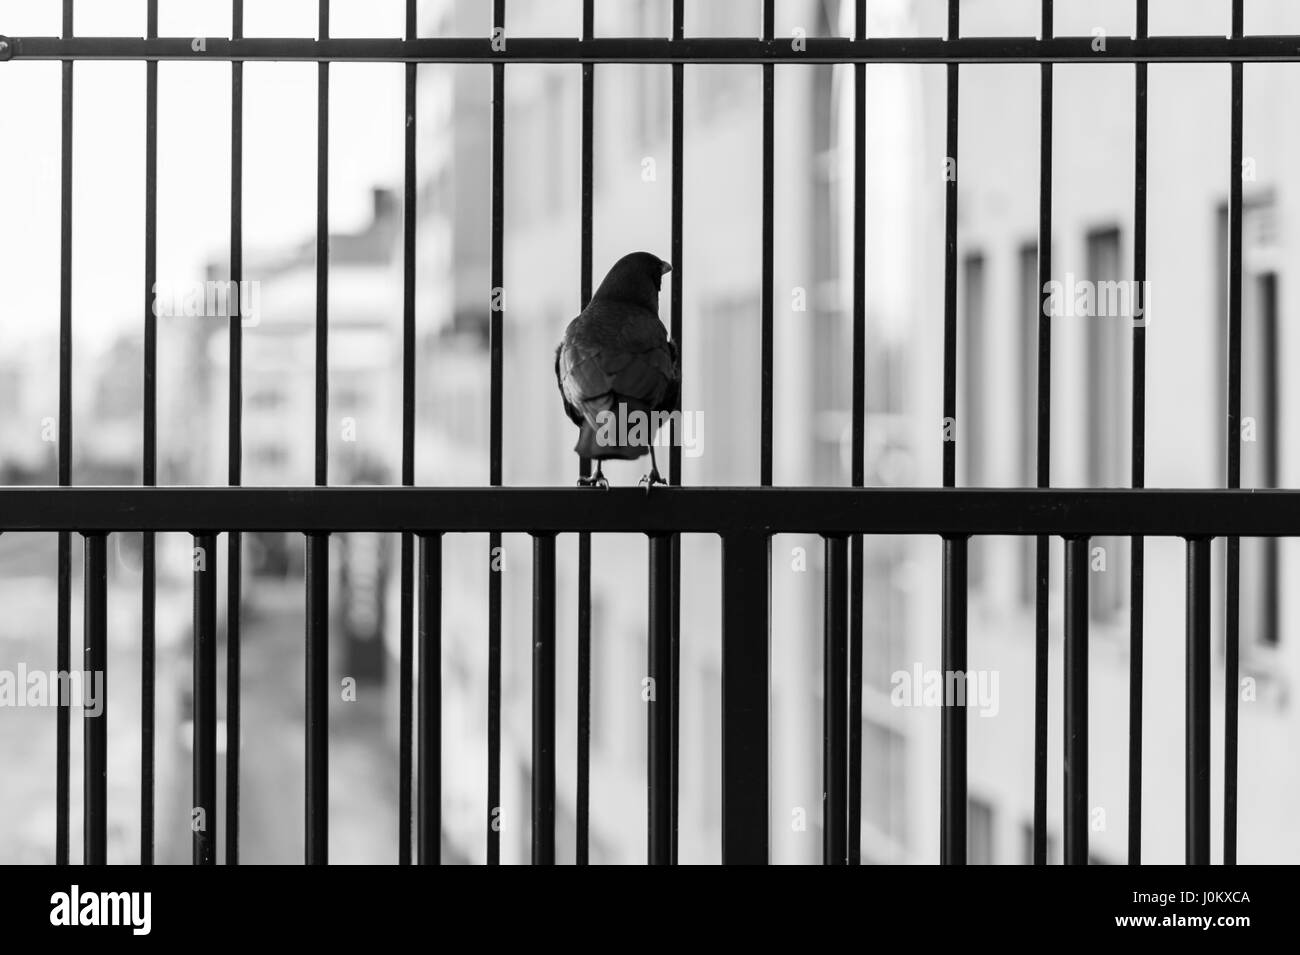 Crow sitting on layers of wrought iron fences, staring out onto blurred urban landscape. Stock Photo